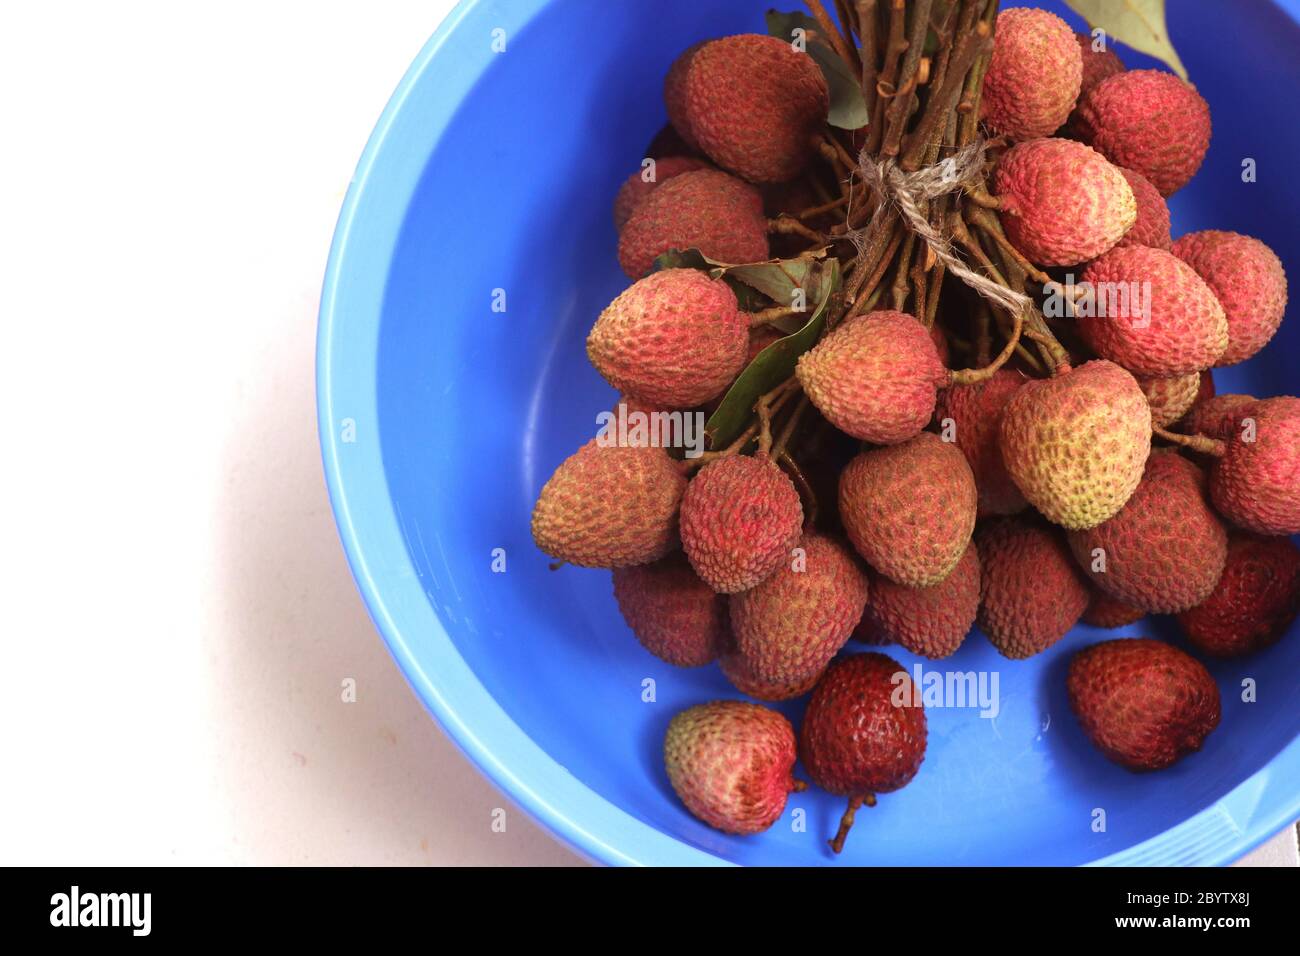 Fresh red litchi, lichee, lychee, or litchi in a colorful bowl, close up photography Stock Photo